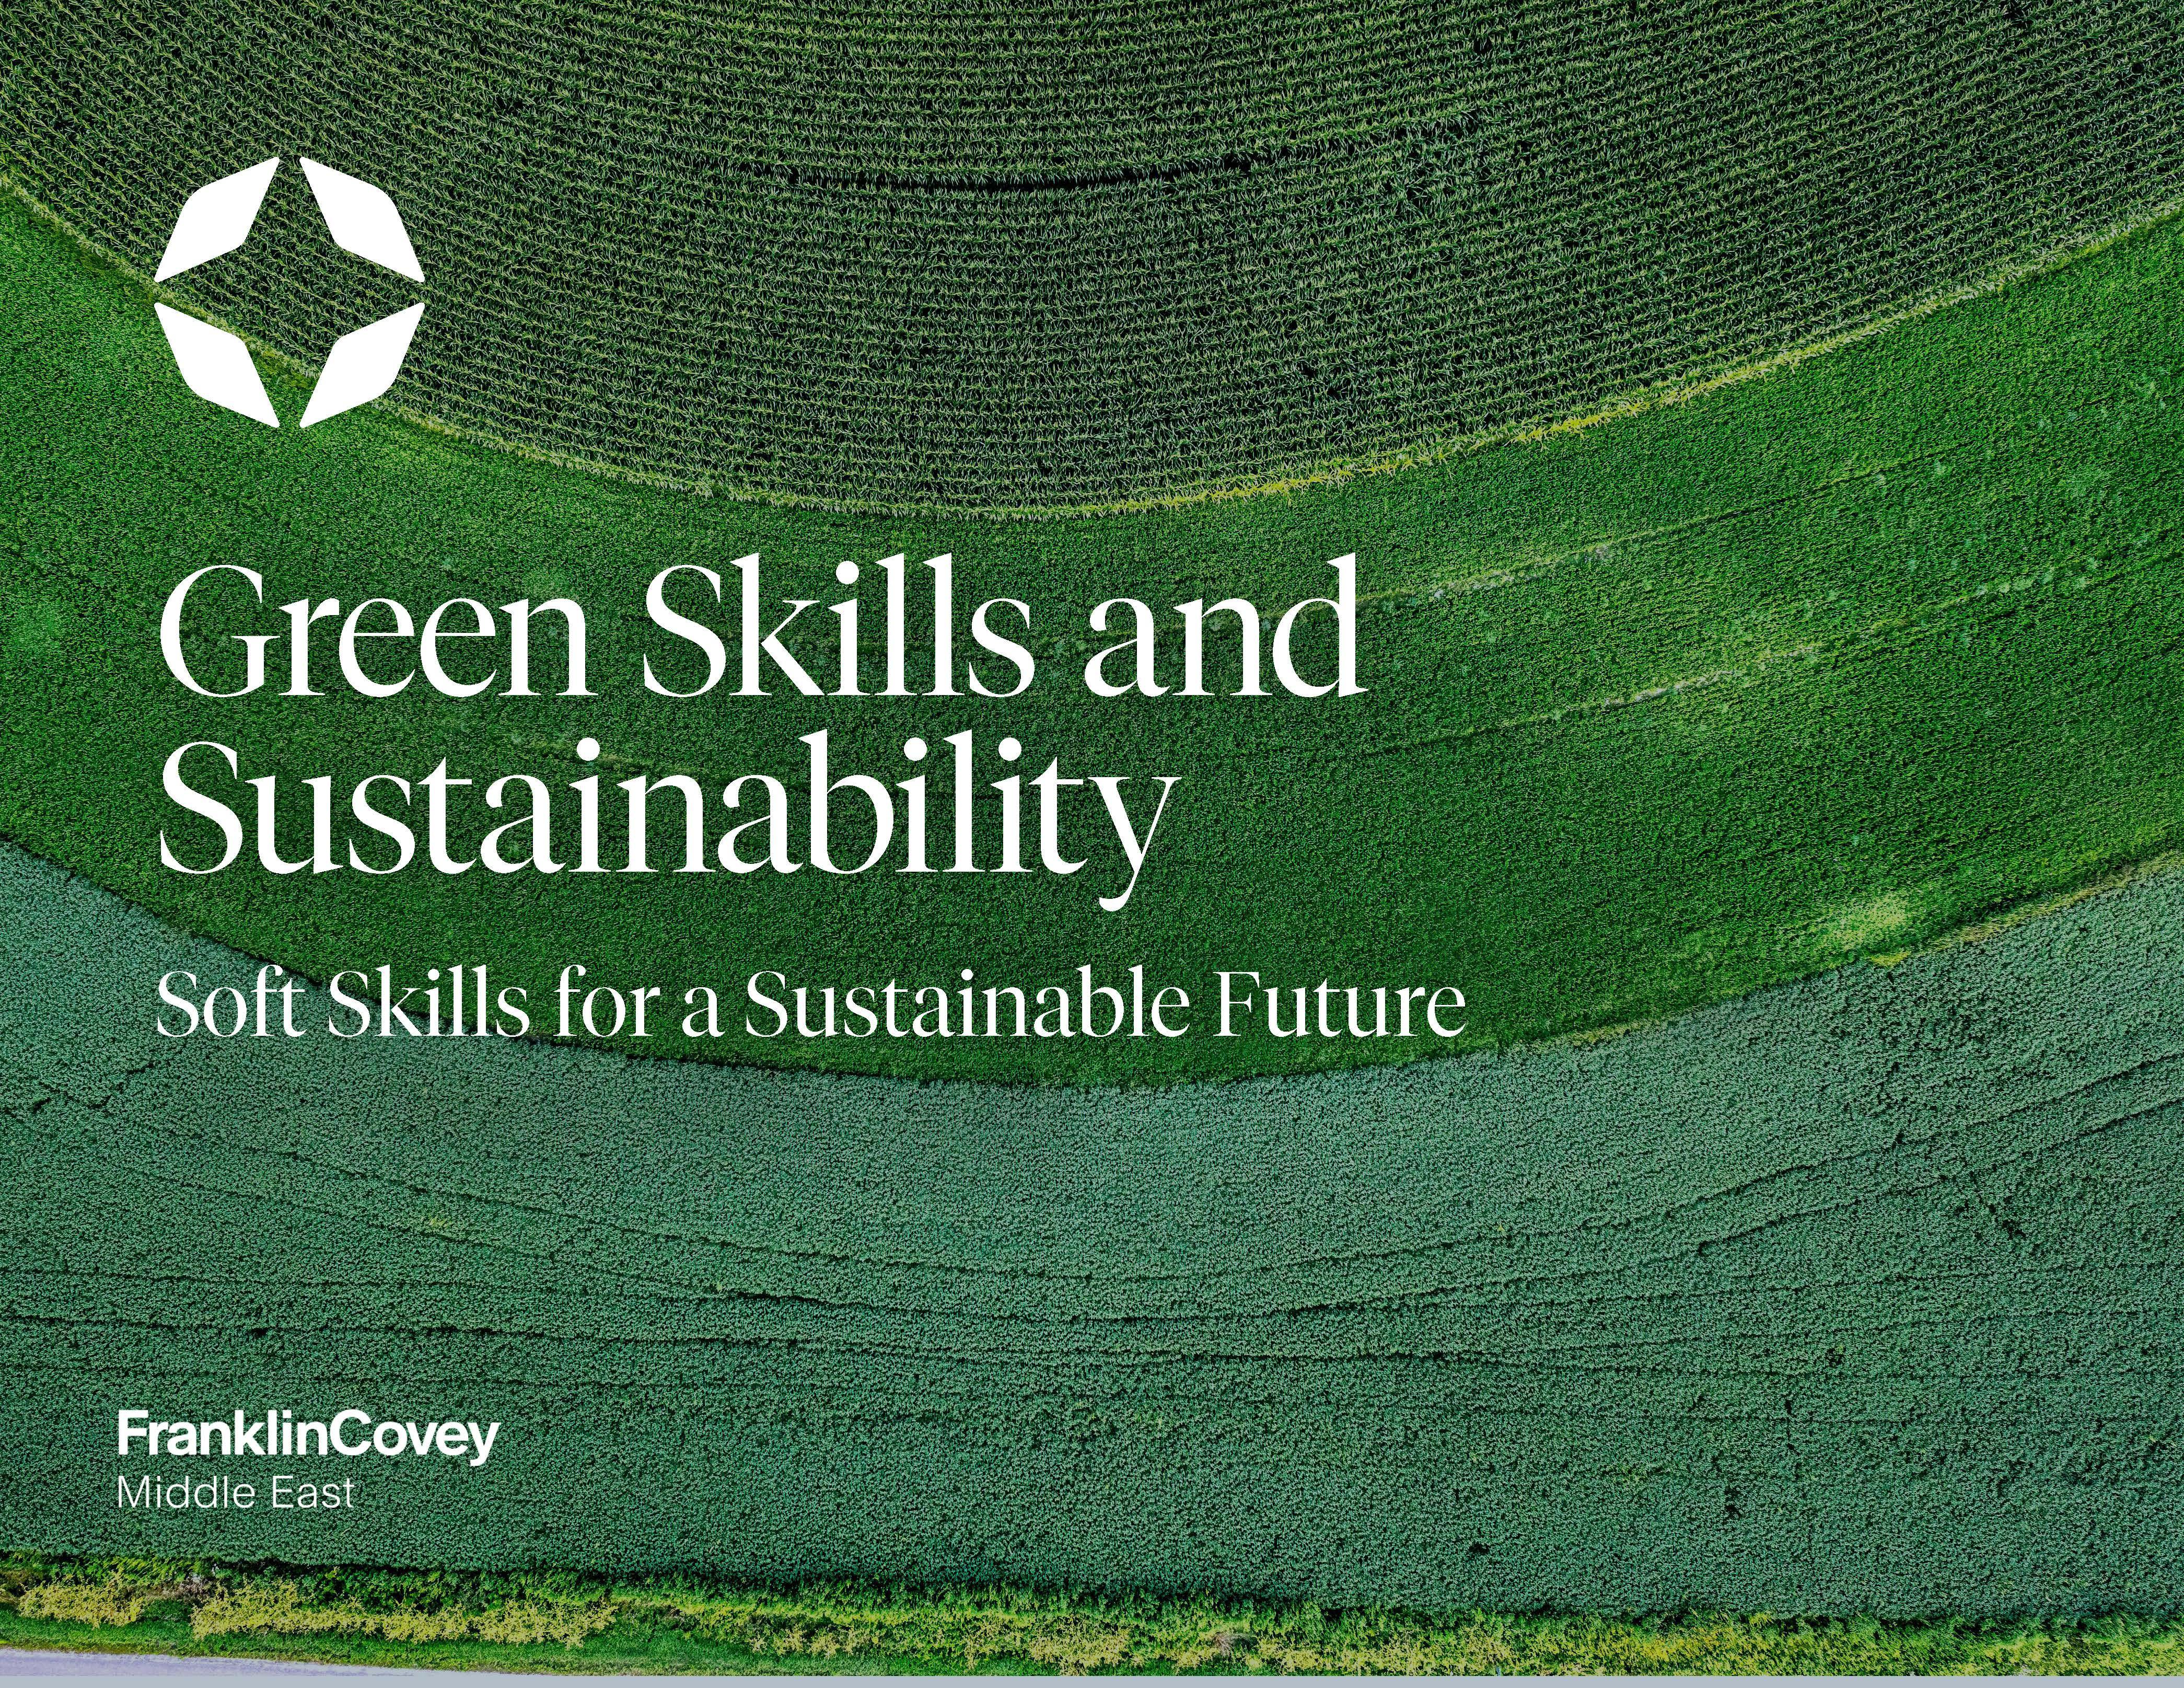 [Whitepaper]: Soft Skills for a Sustainable Future